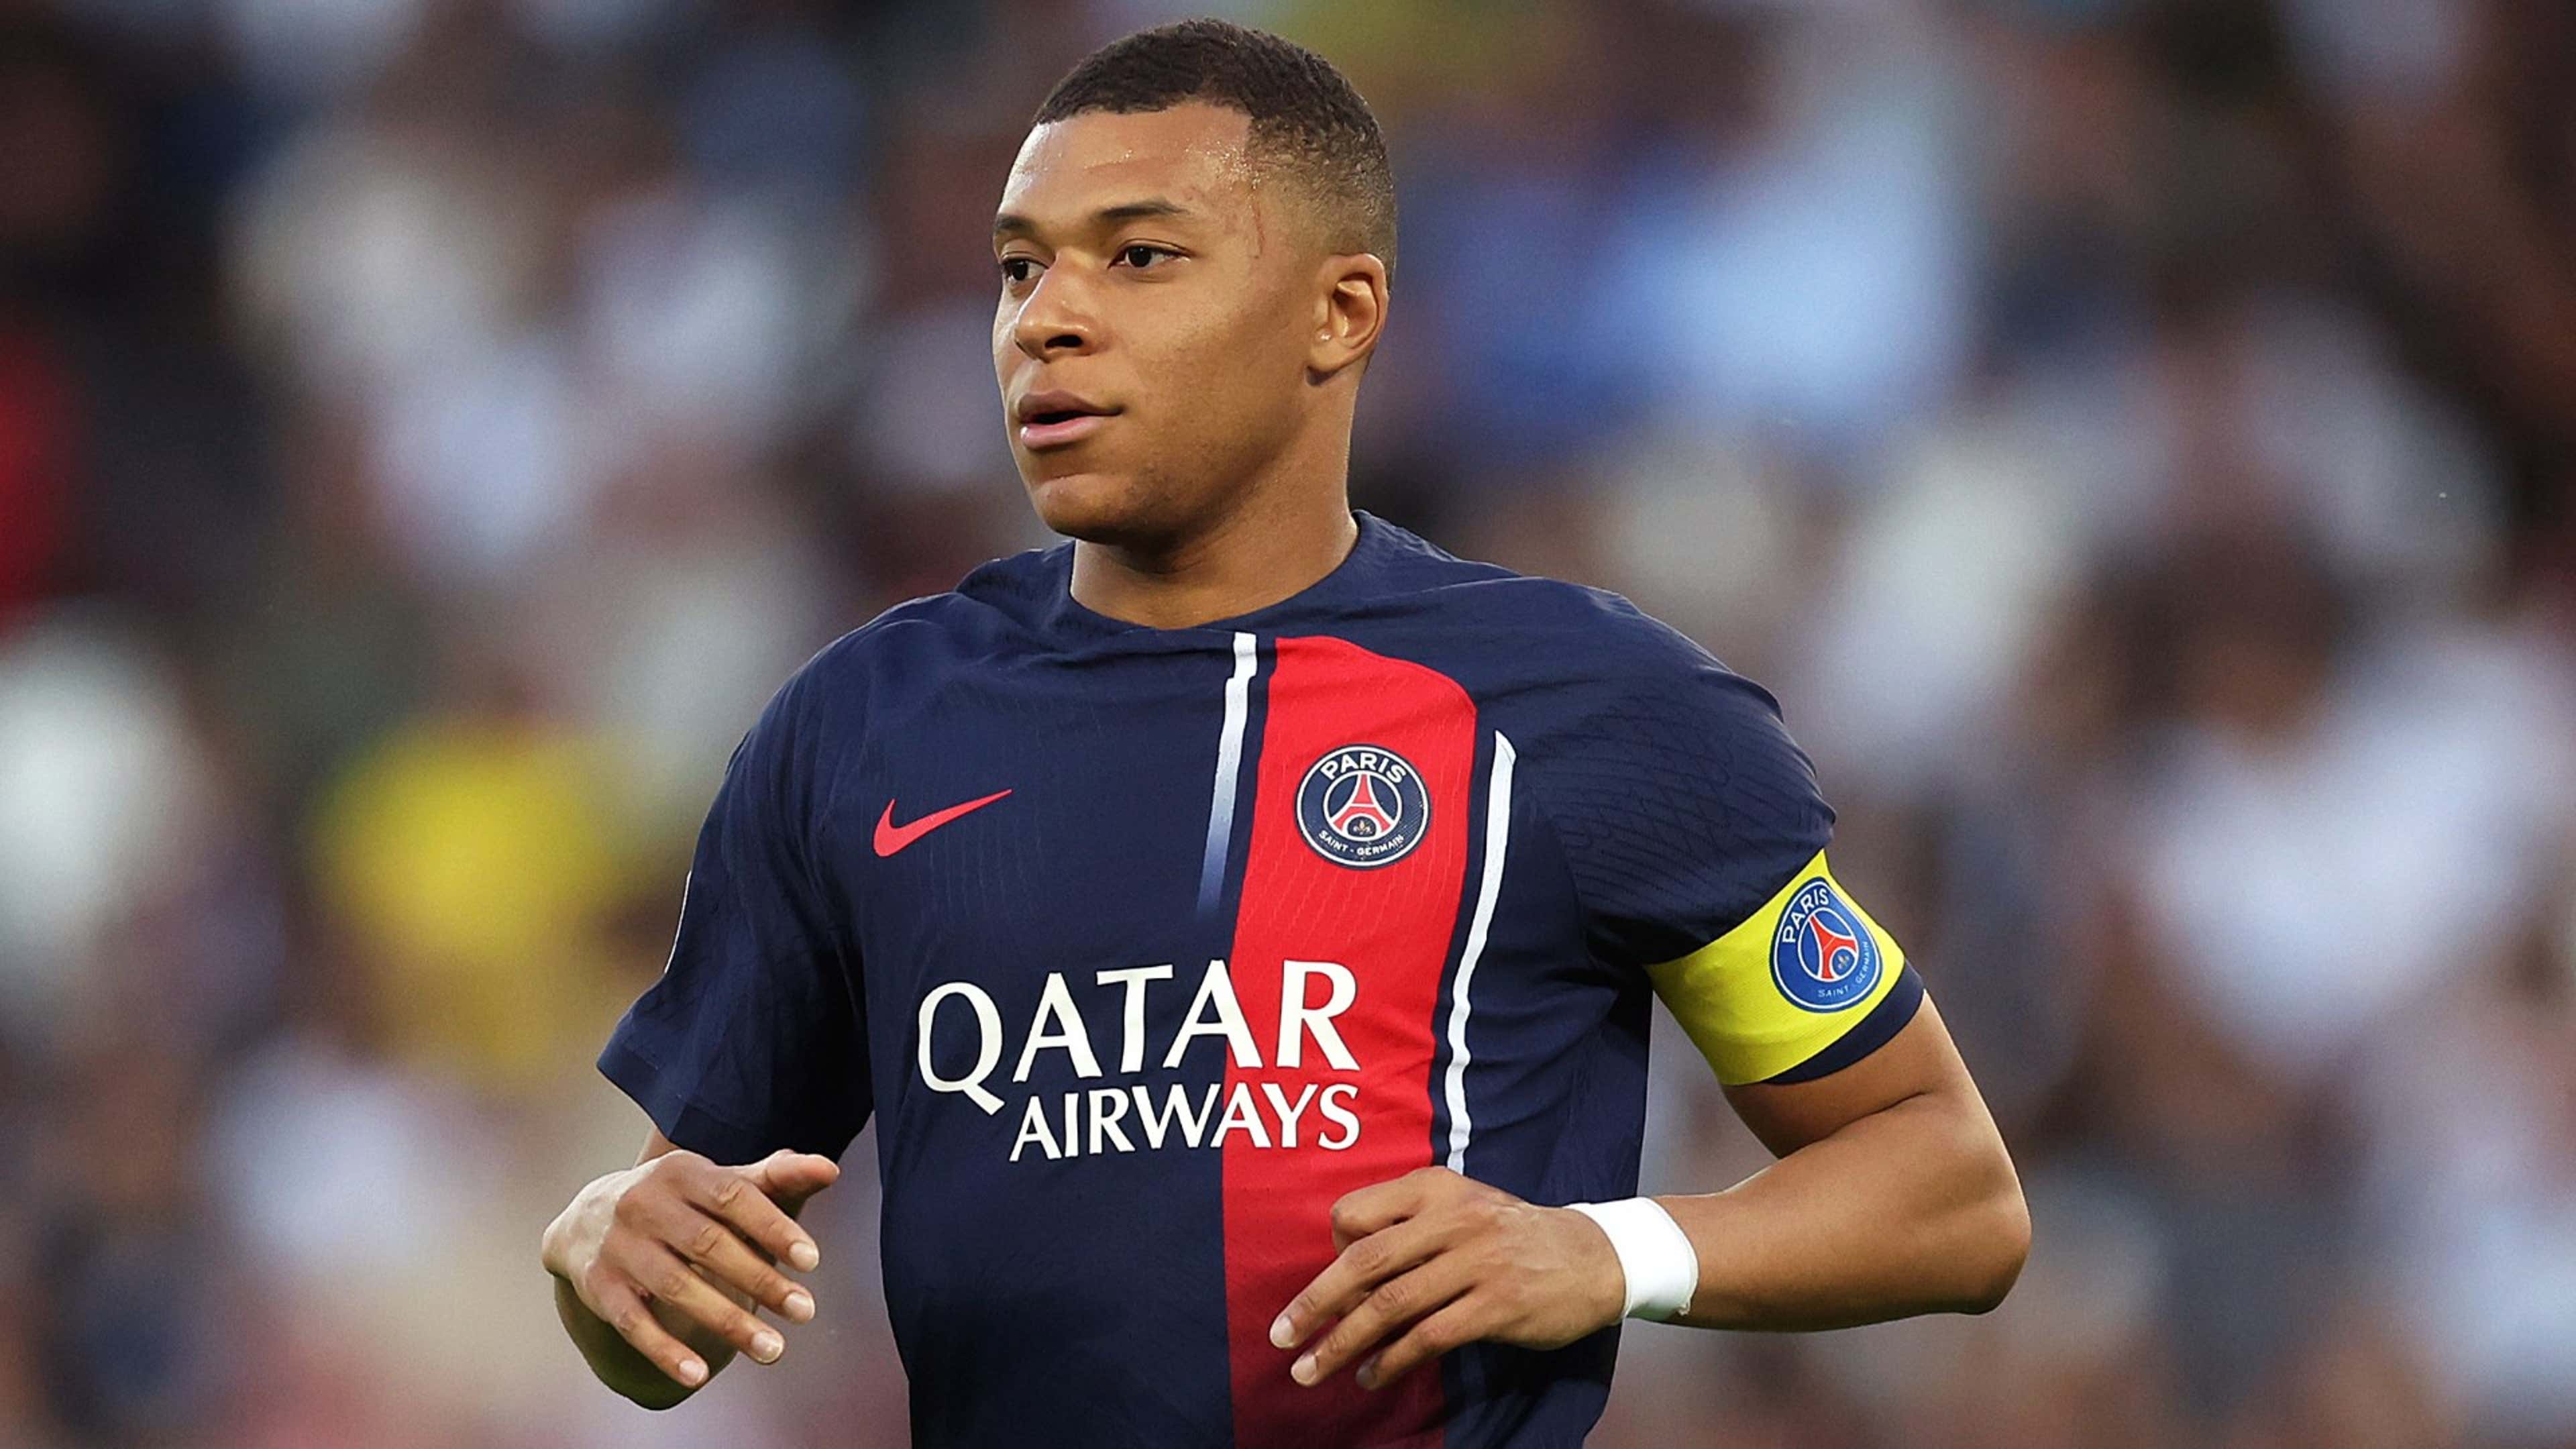 The real reasons behind PSG's decision to leave Kylian Mbappe out of